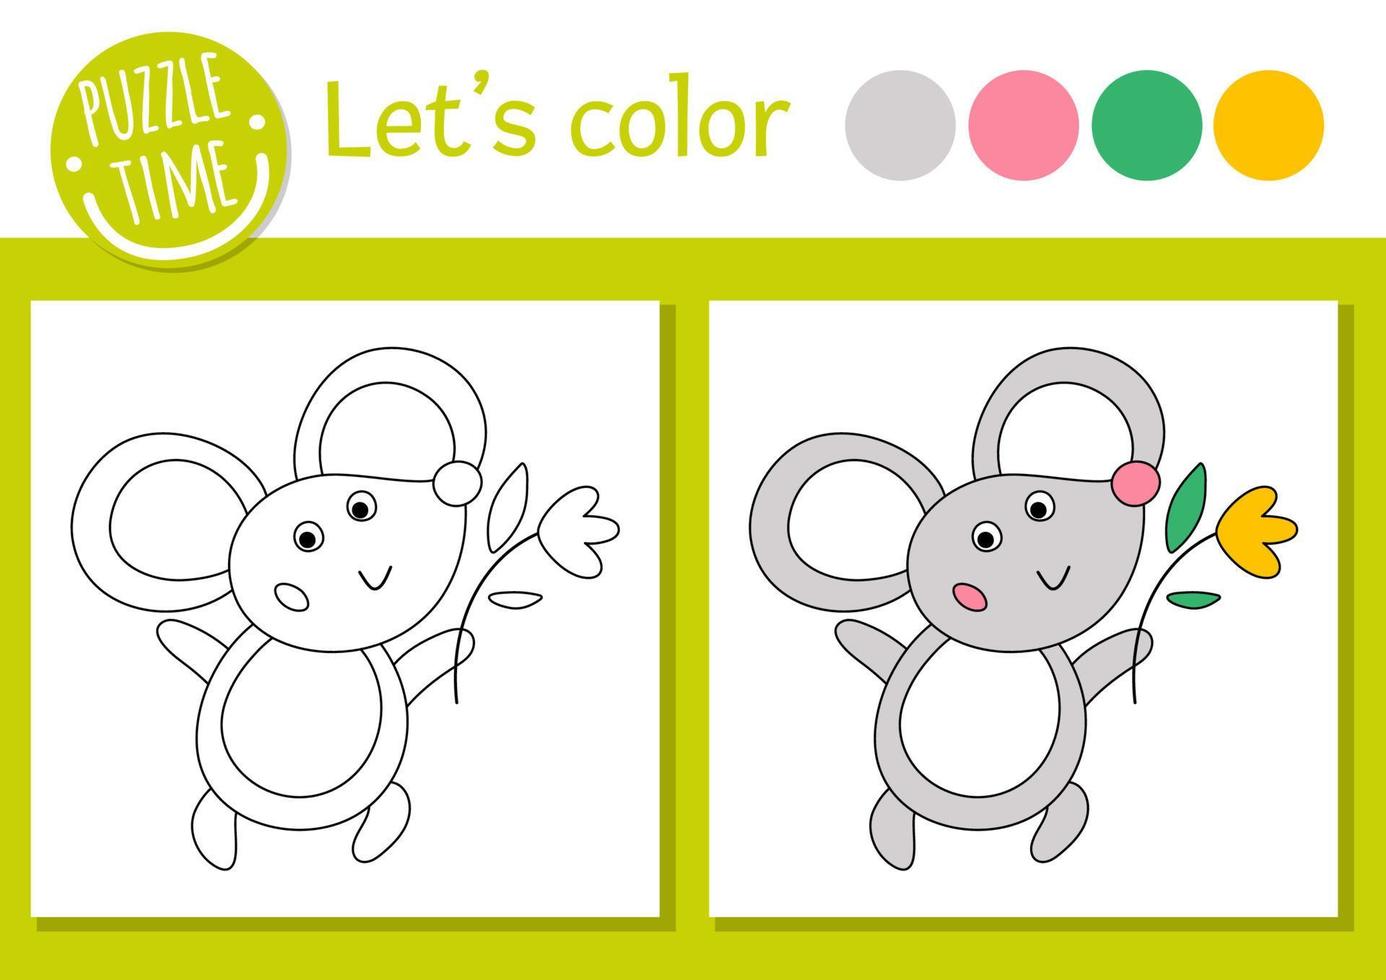 Easter coloring page for children. Funny mouse with flower. Vector holiday outline illustration with cute traditional animal. Adorable spring color book for kids with colored example